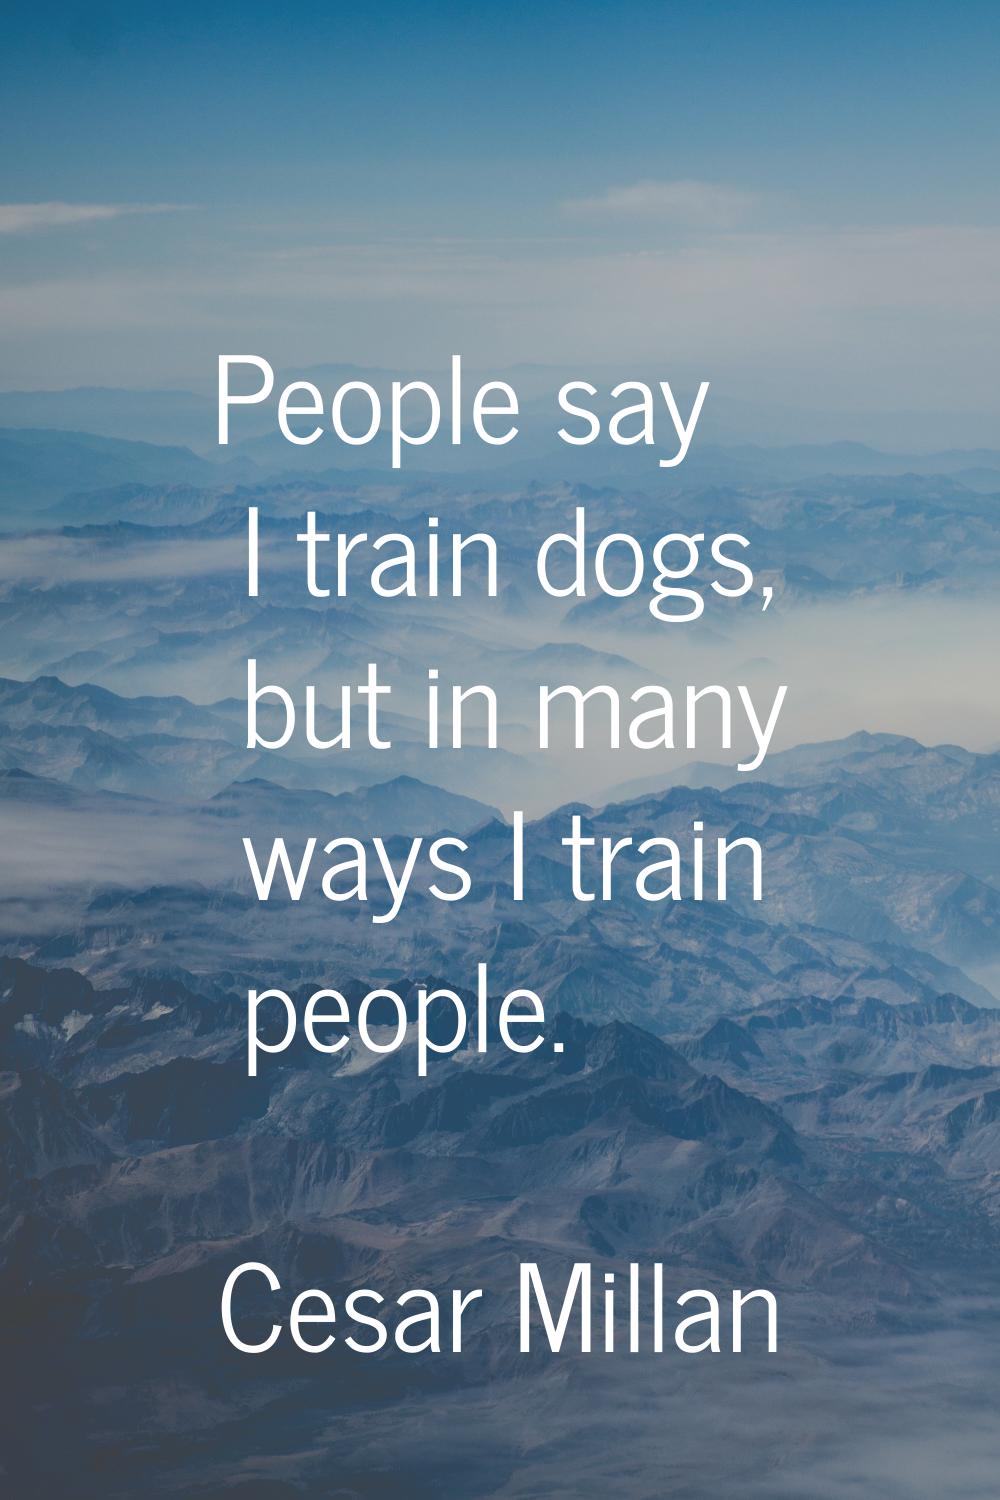 People say I train dogs, but in many ways I train people.